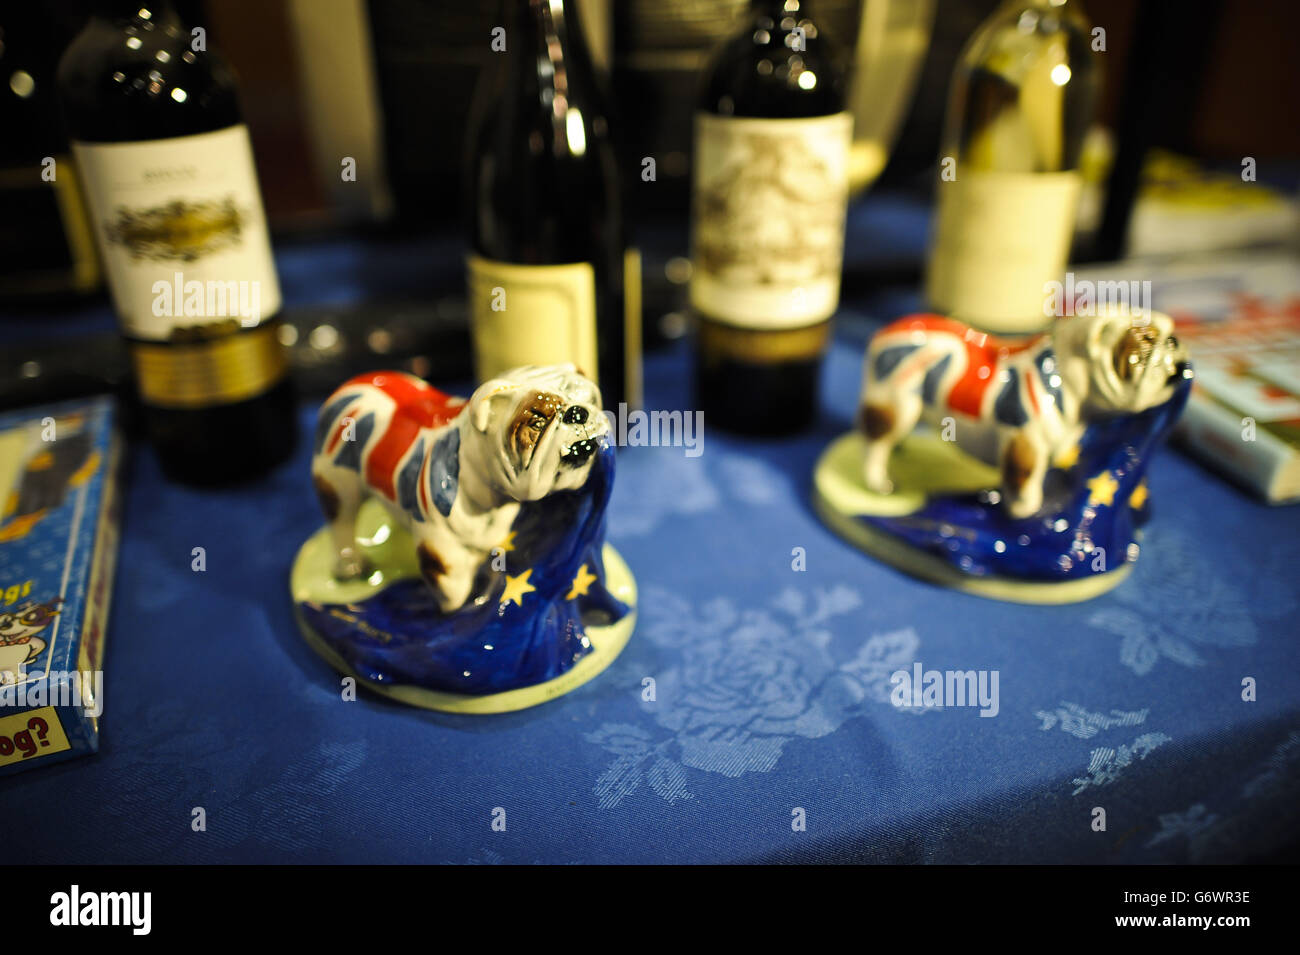 Porcelain bulldog figures eating a European flag at the UKIP Spring Conference 2014 at the Riviera International Conference Centre, Torquay. Stock Photo